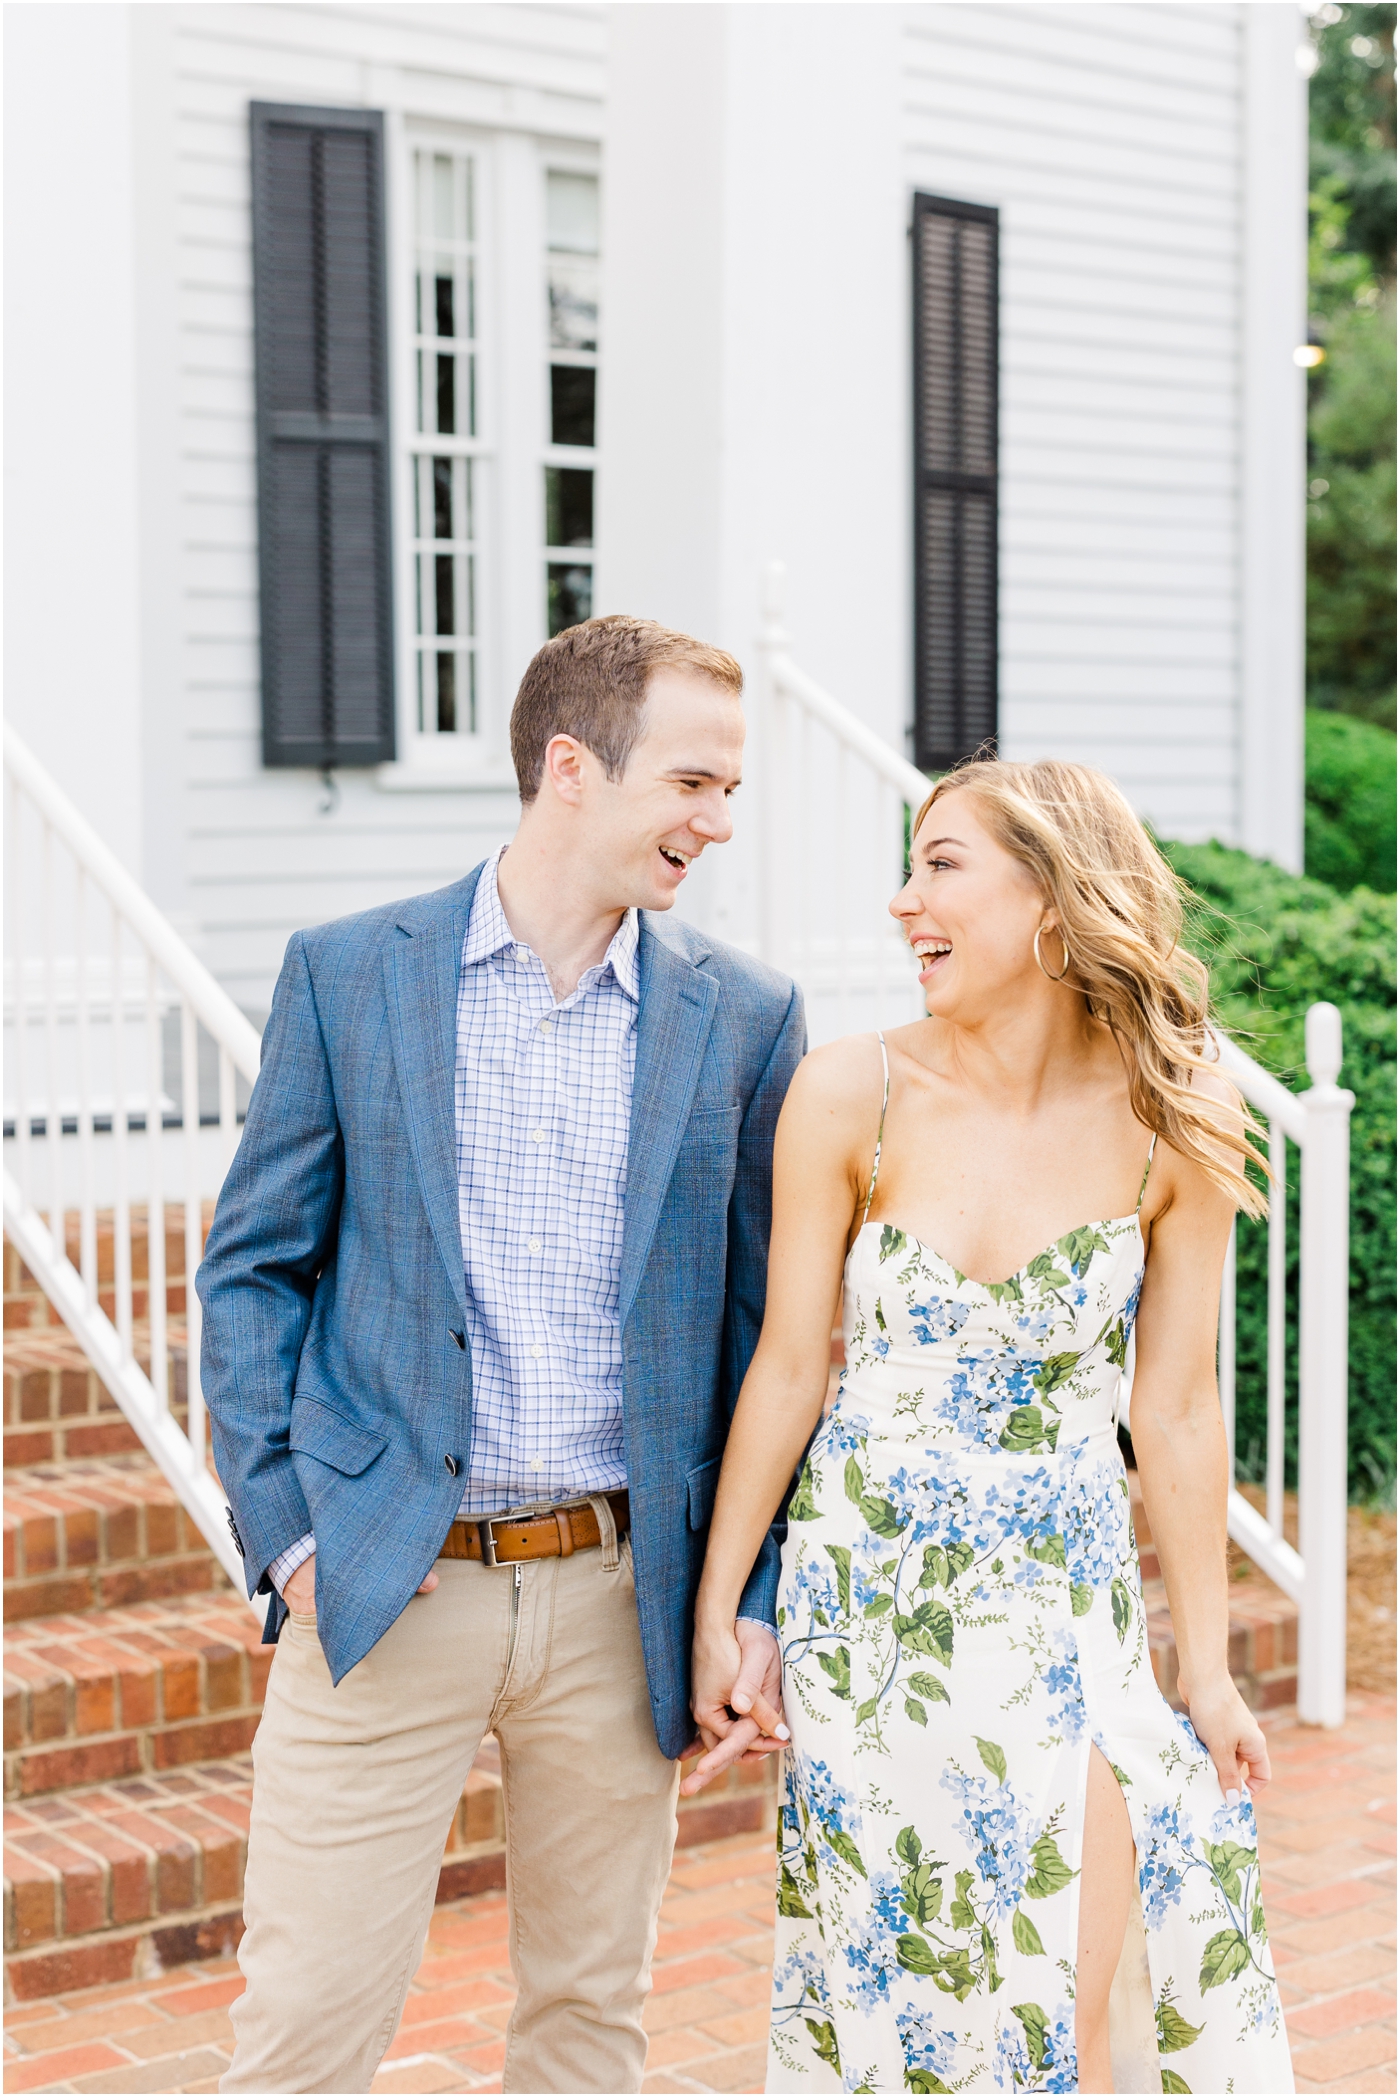 Furman University Engagement Session in Greenville SC at the President's House